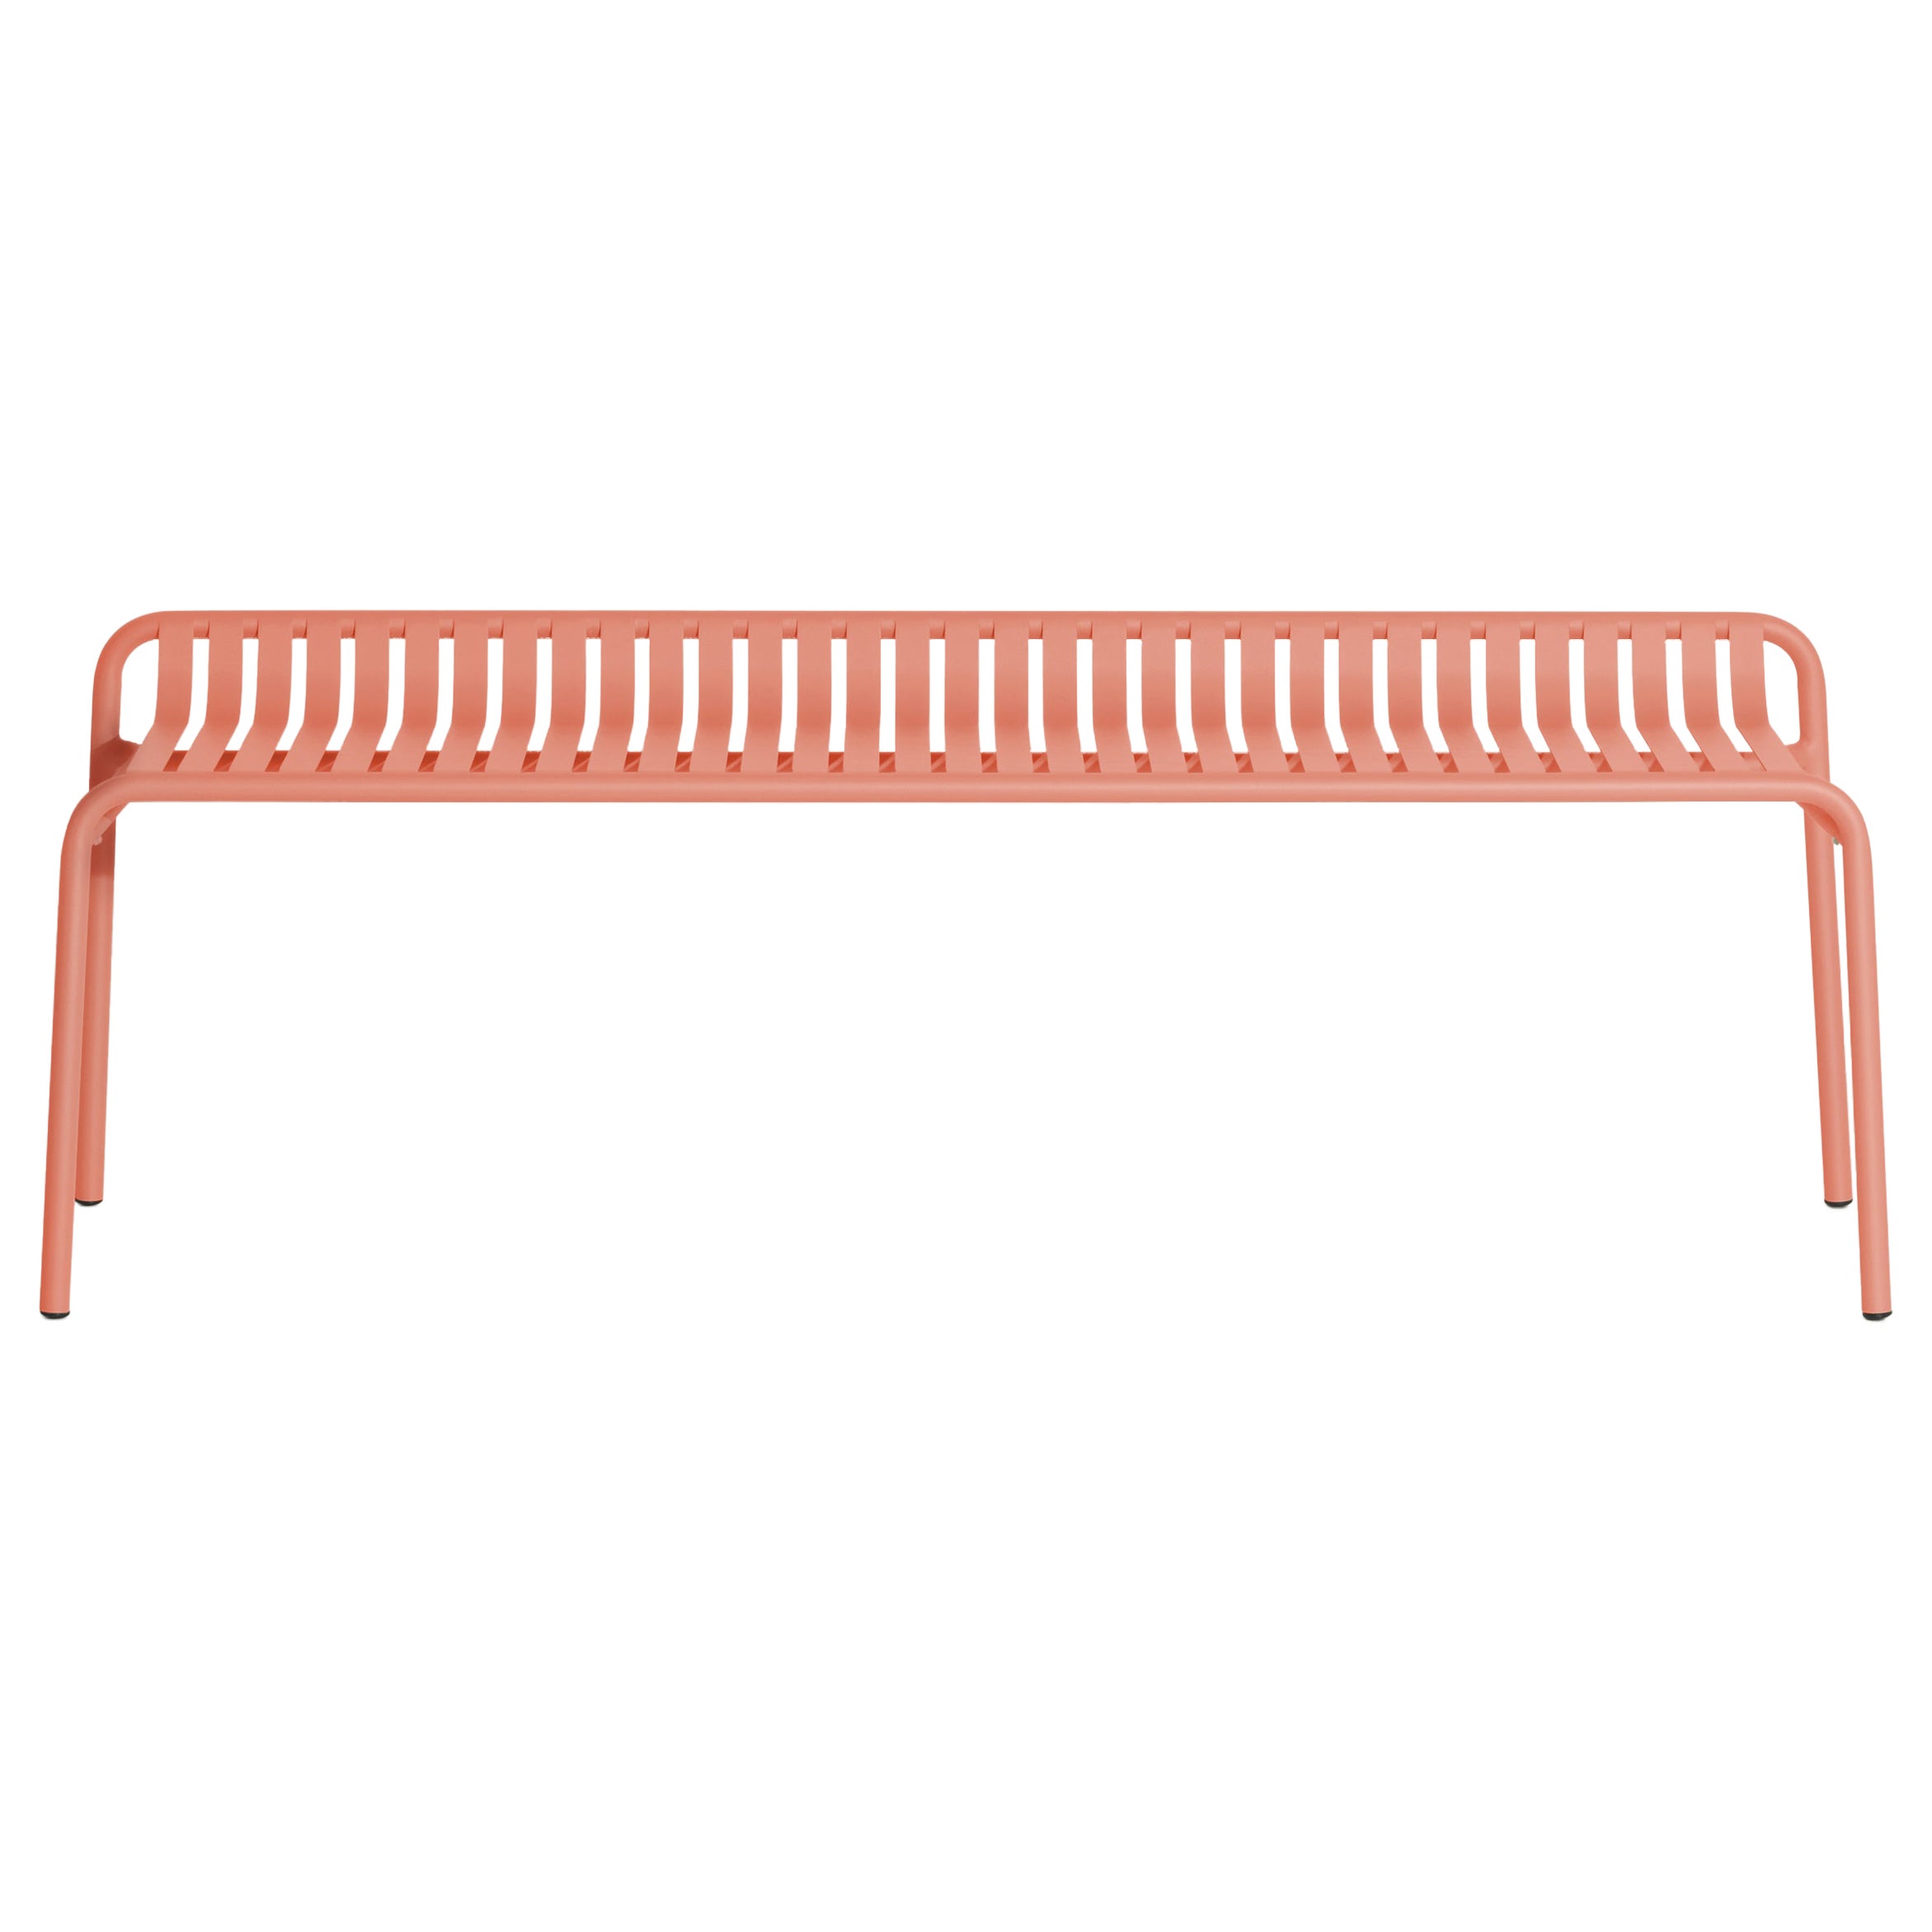 Petite Friture Week-End Bench without Back in Coral Aluminium, 2017 